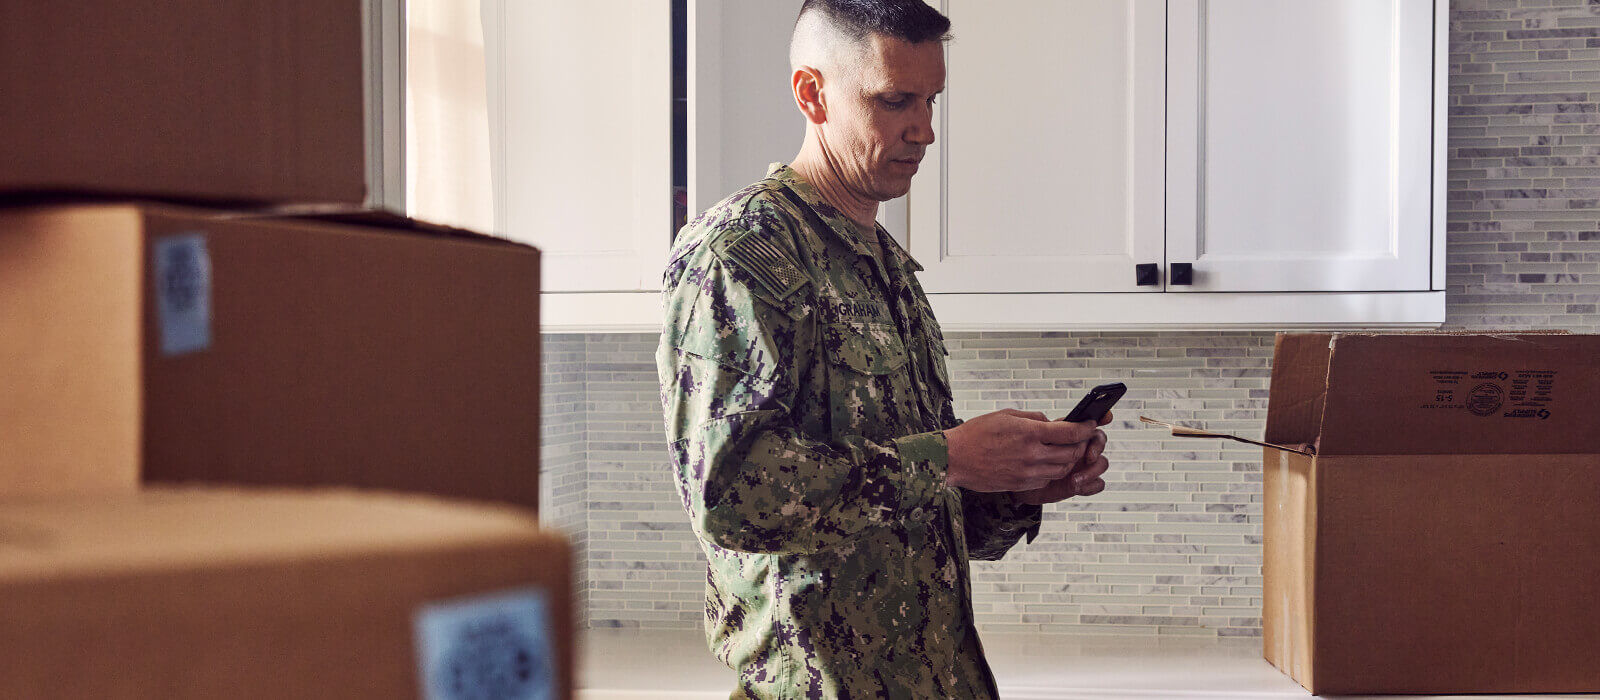 Servicemember texting on a phone surrounded by packing boxes.